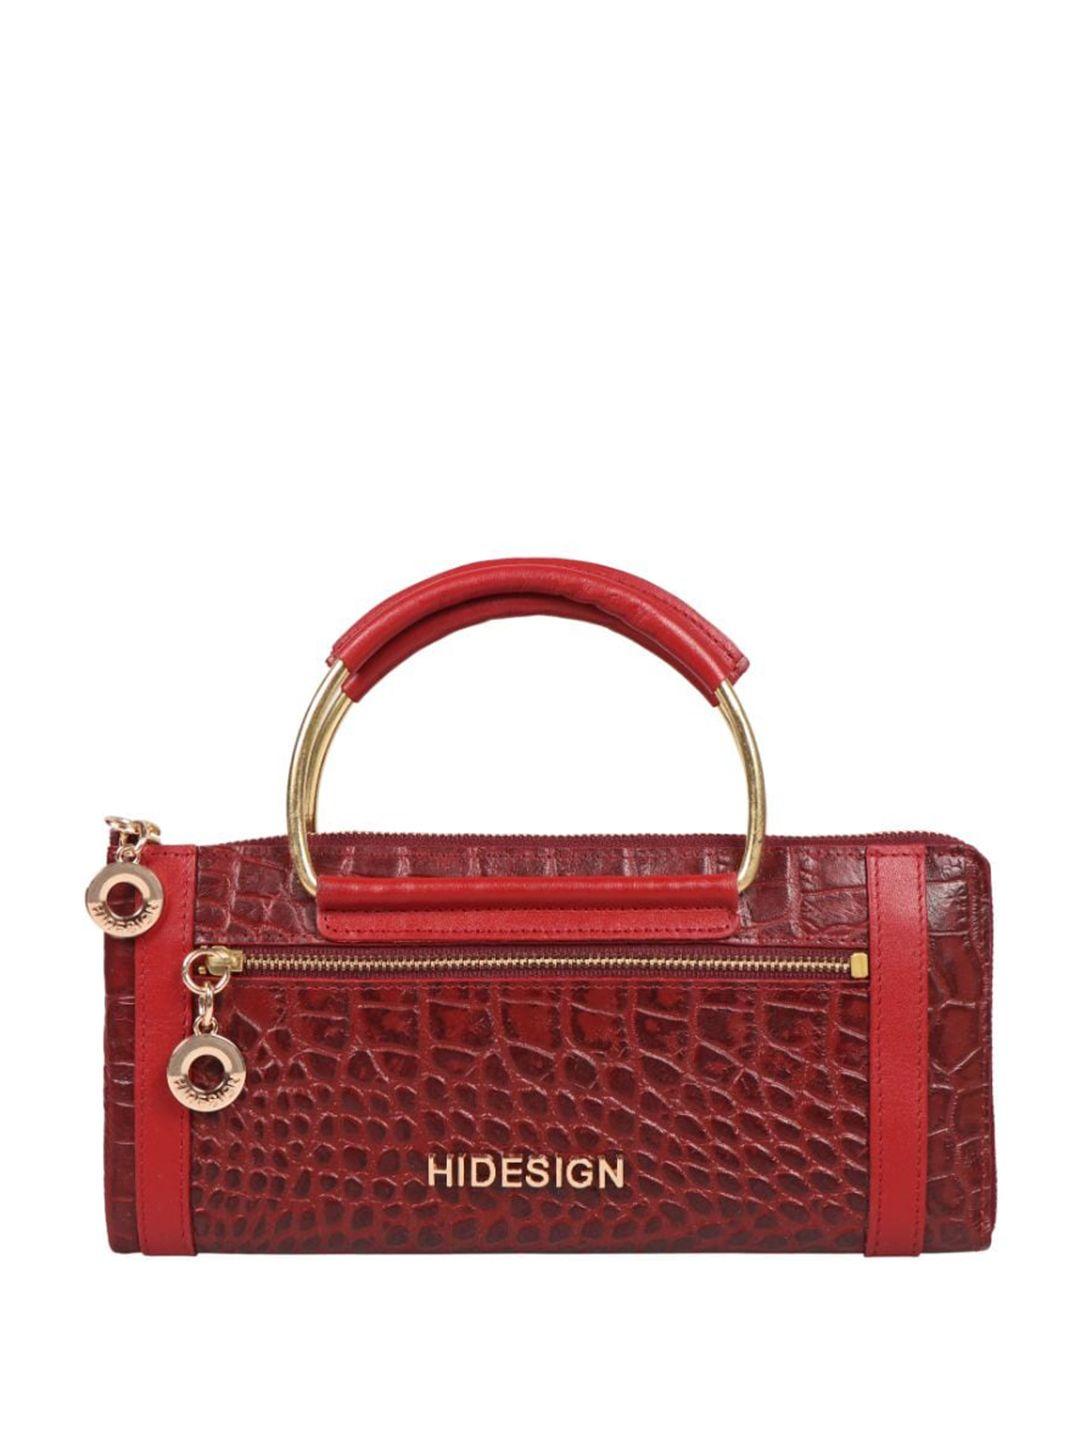 hidesign-textured-leather-envelope-clutch